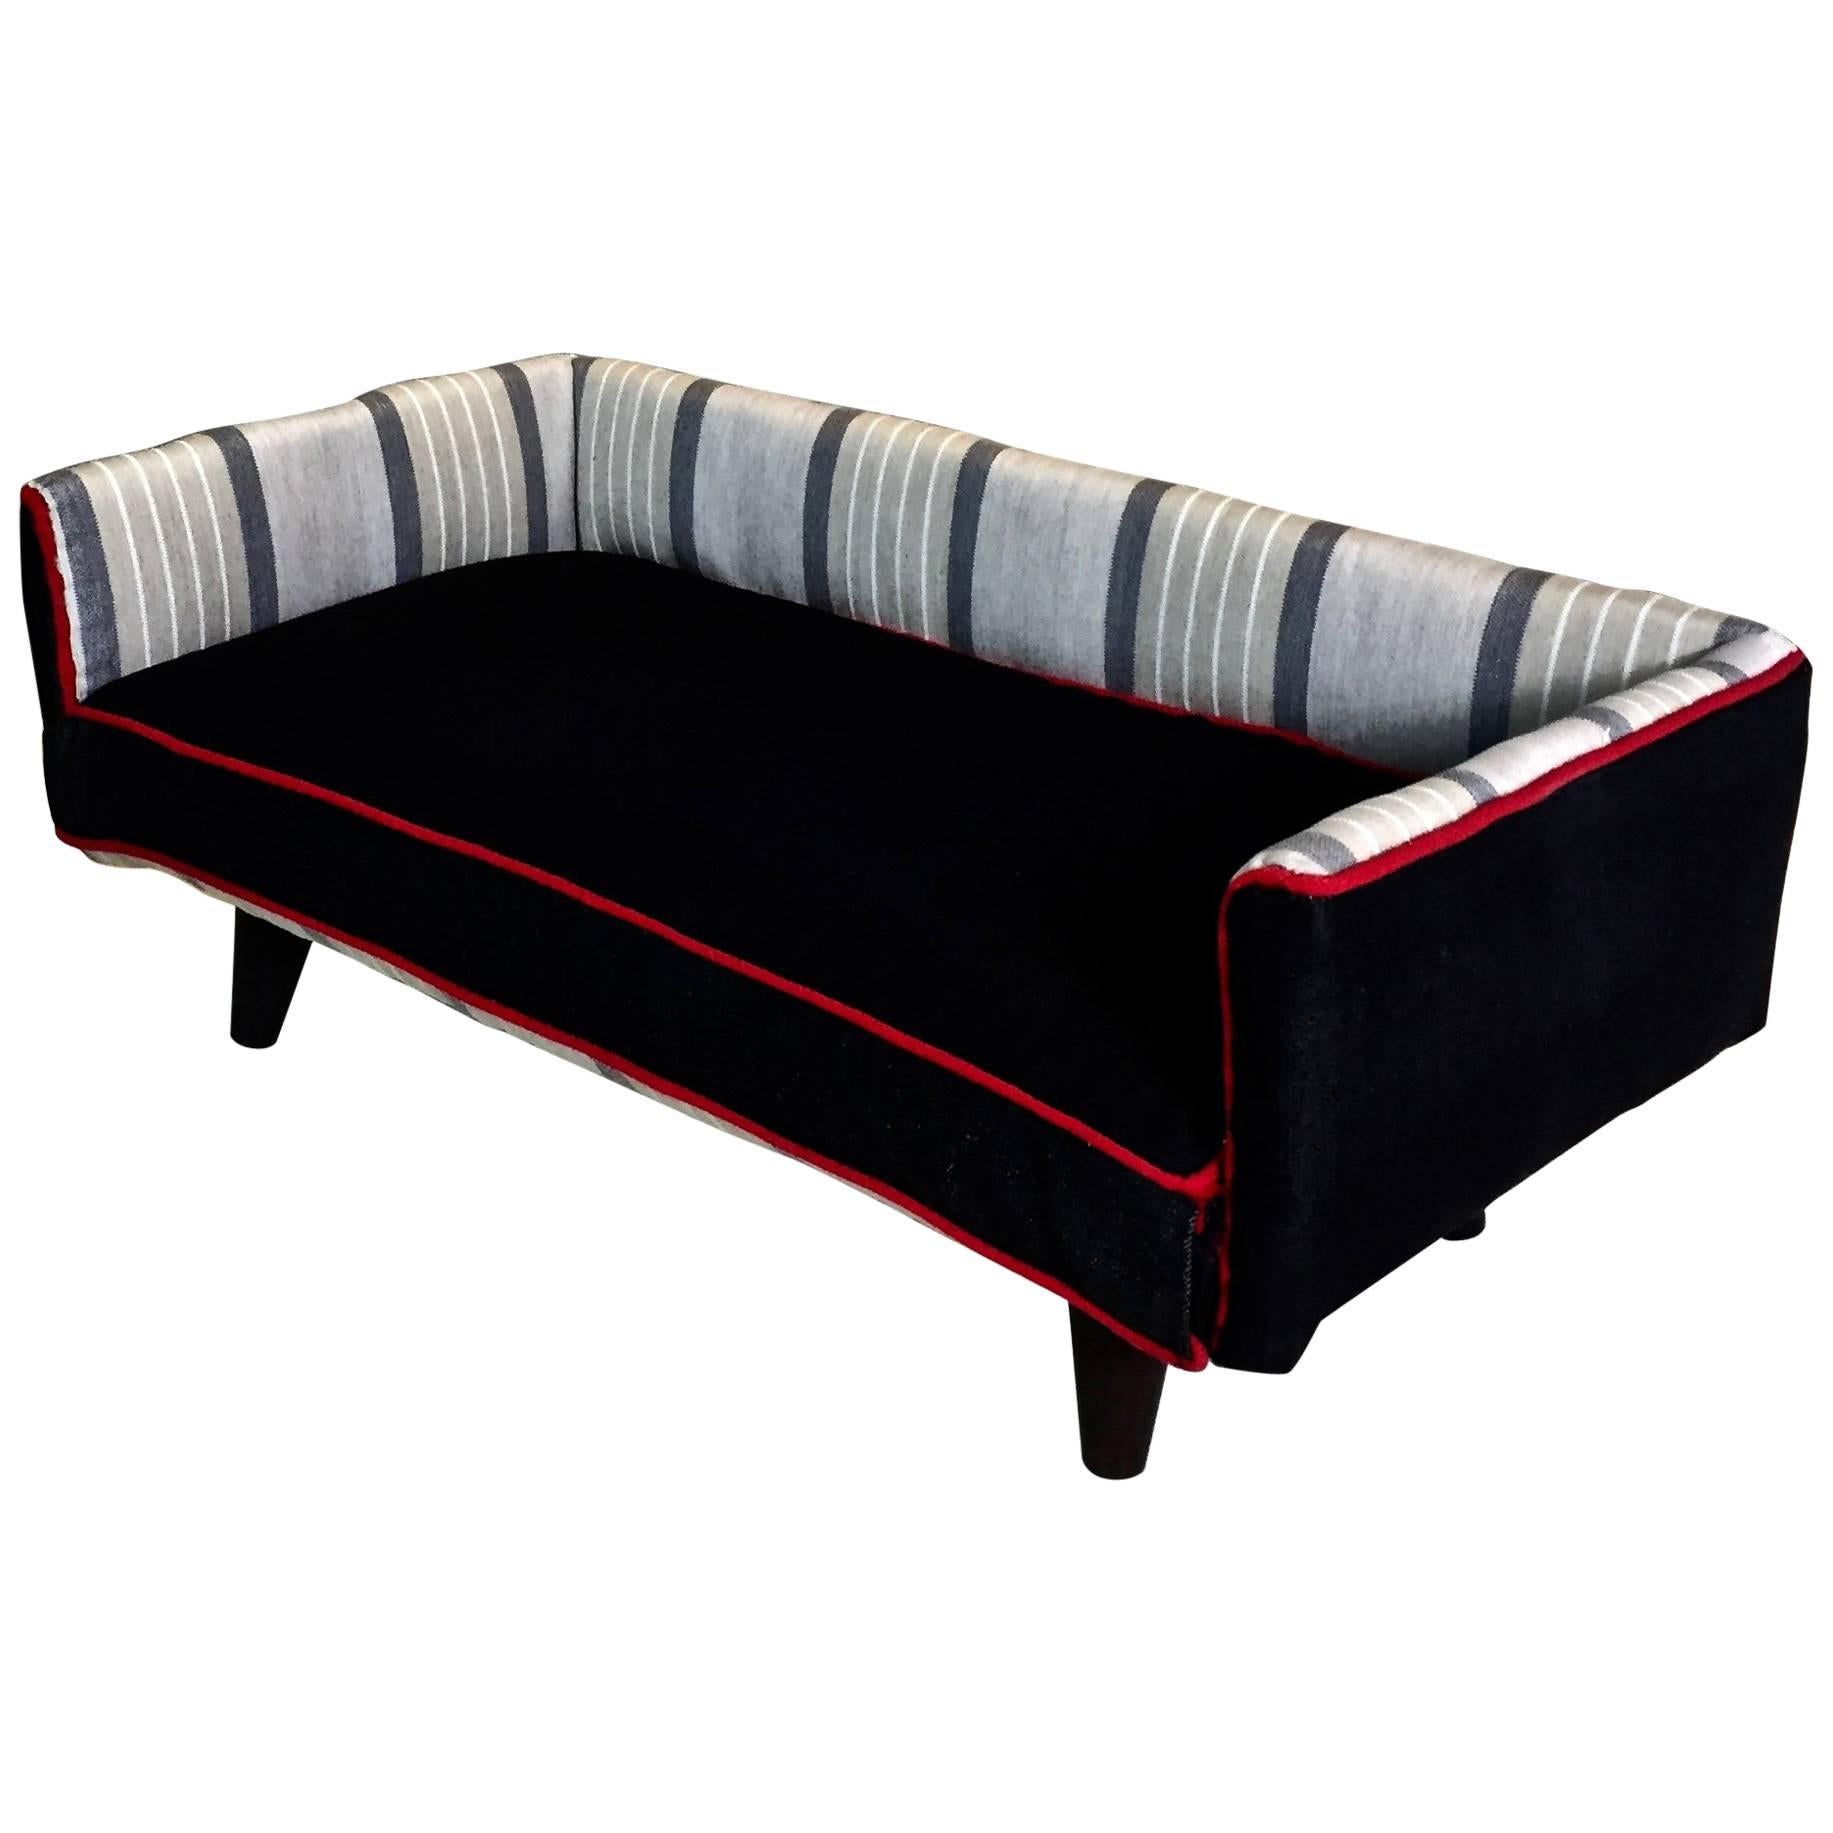 Black Denim and Stripe Midcentury Dogbed For Sale